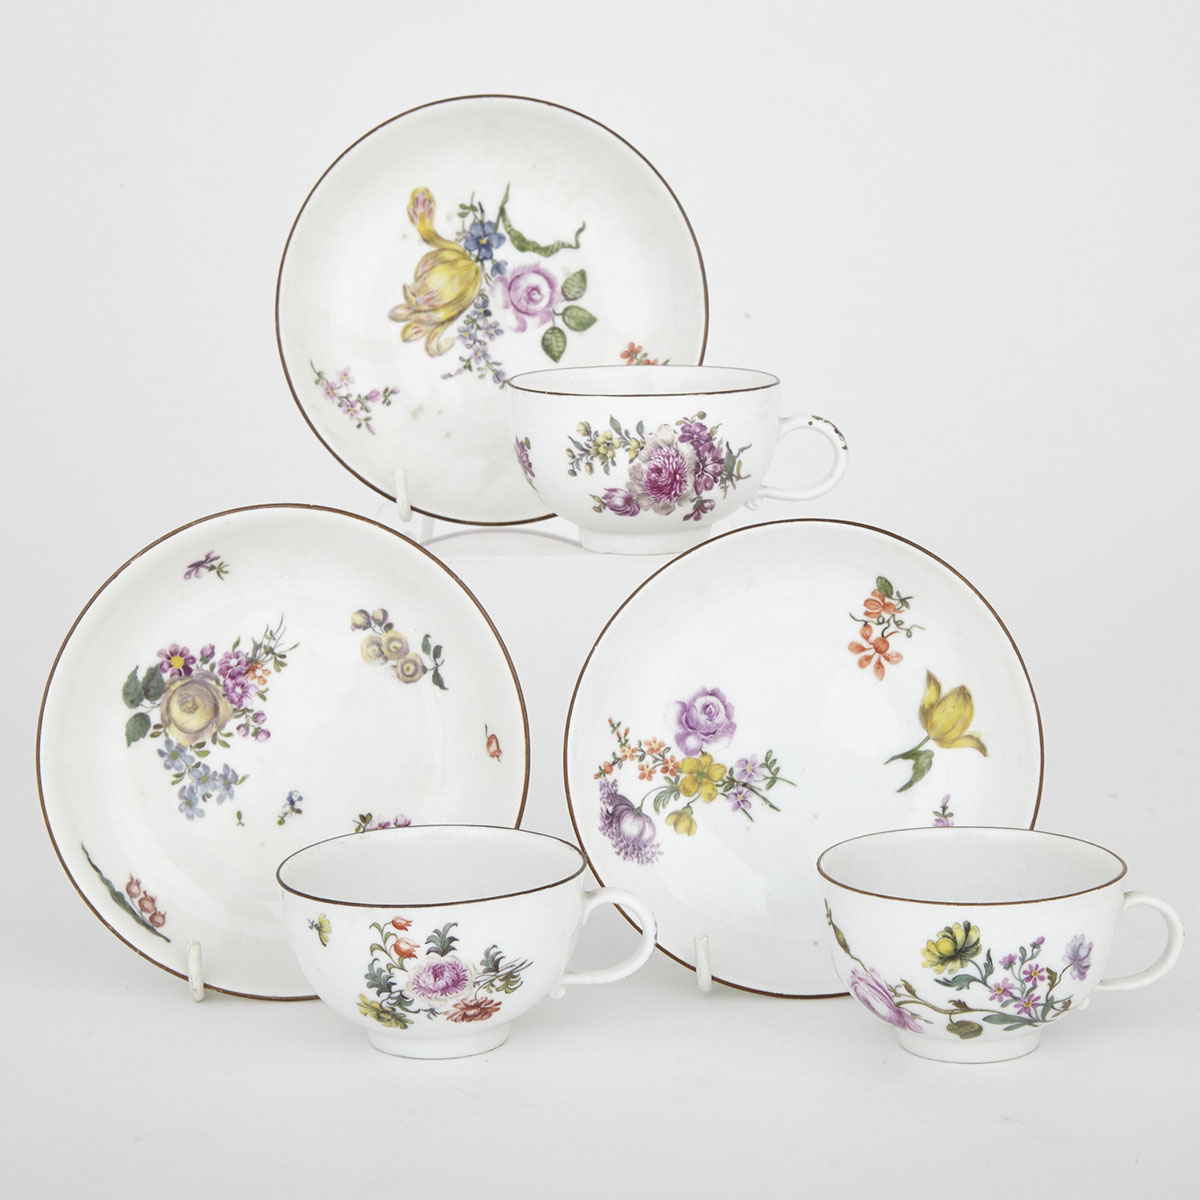 Three Meissen Tea Cups and Saucers, 18th century